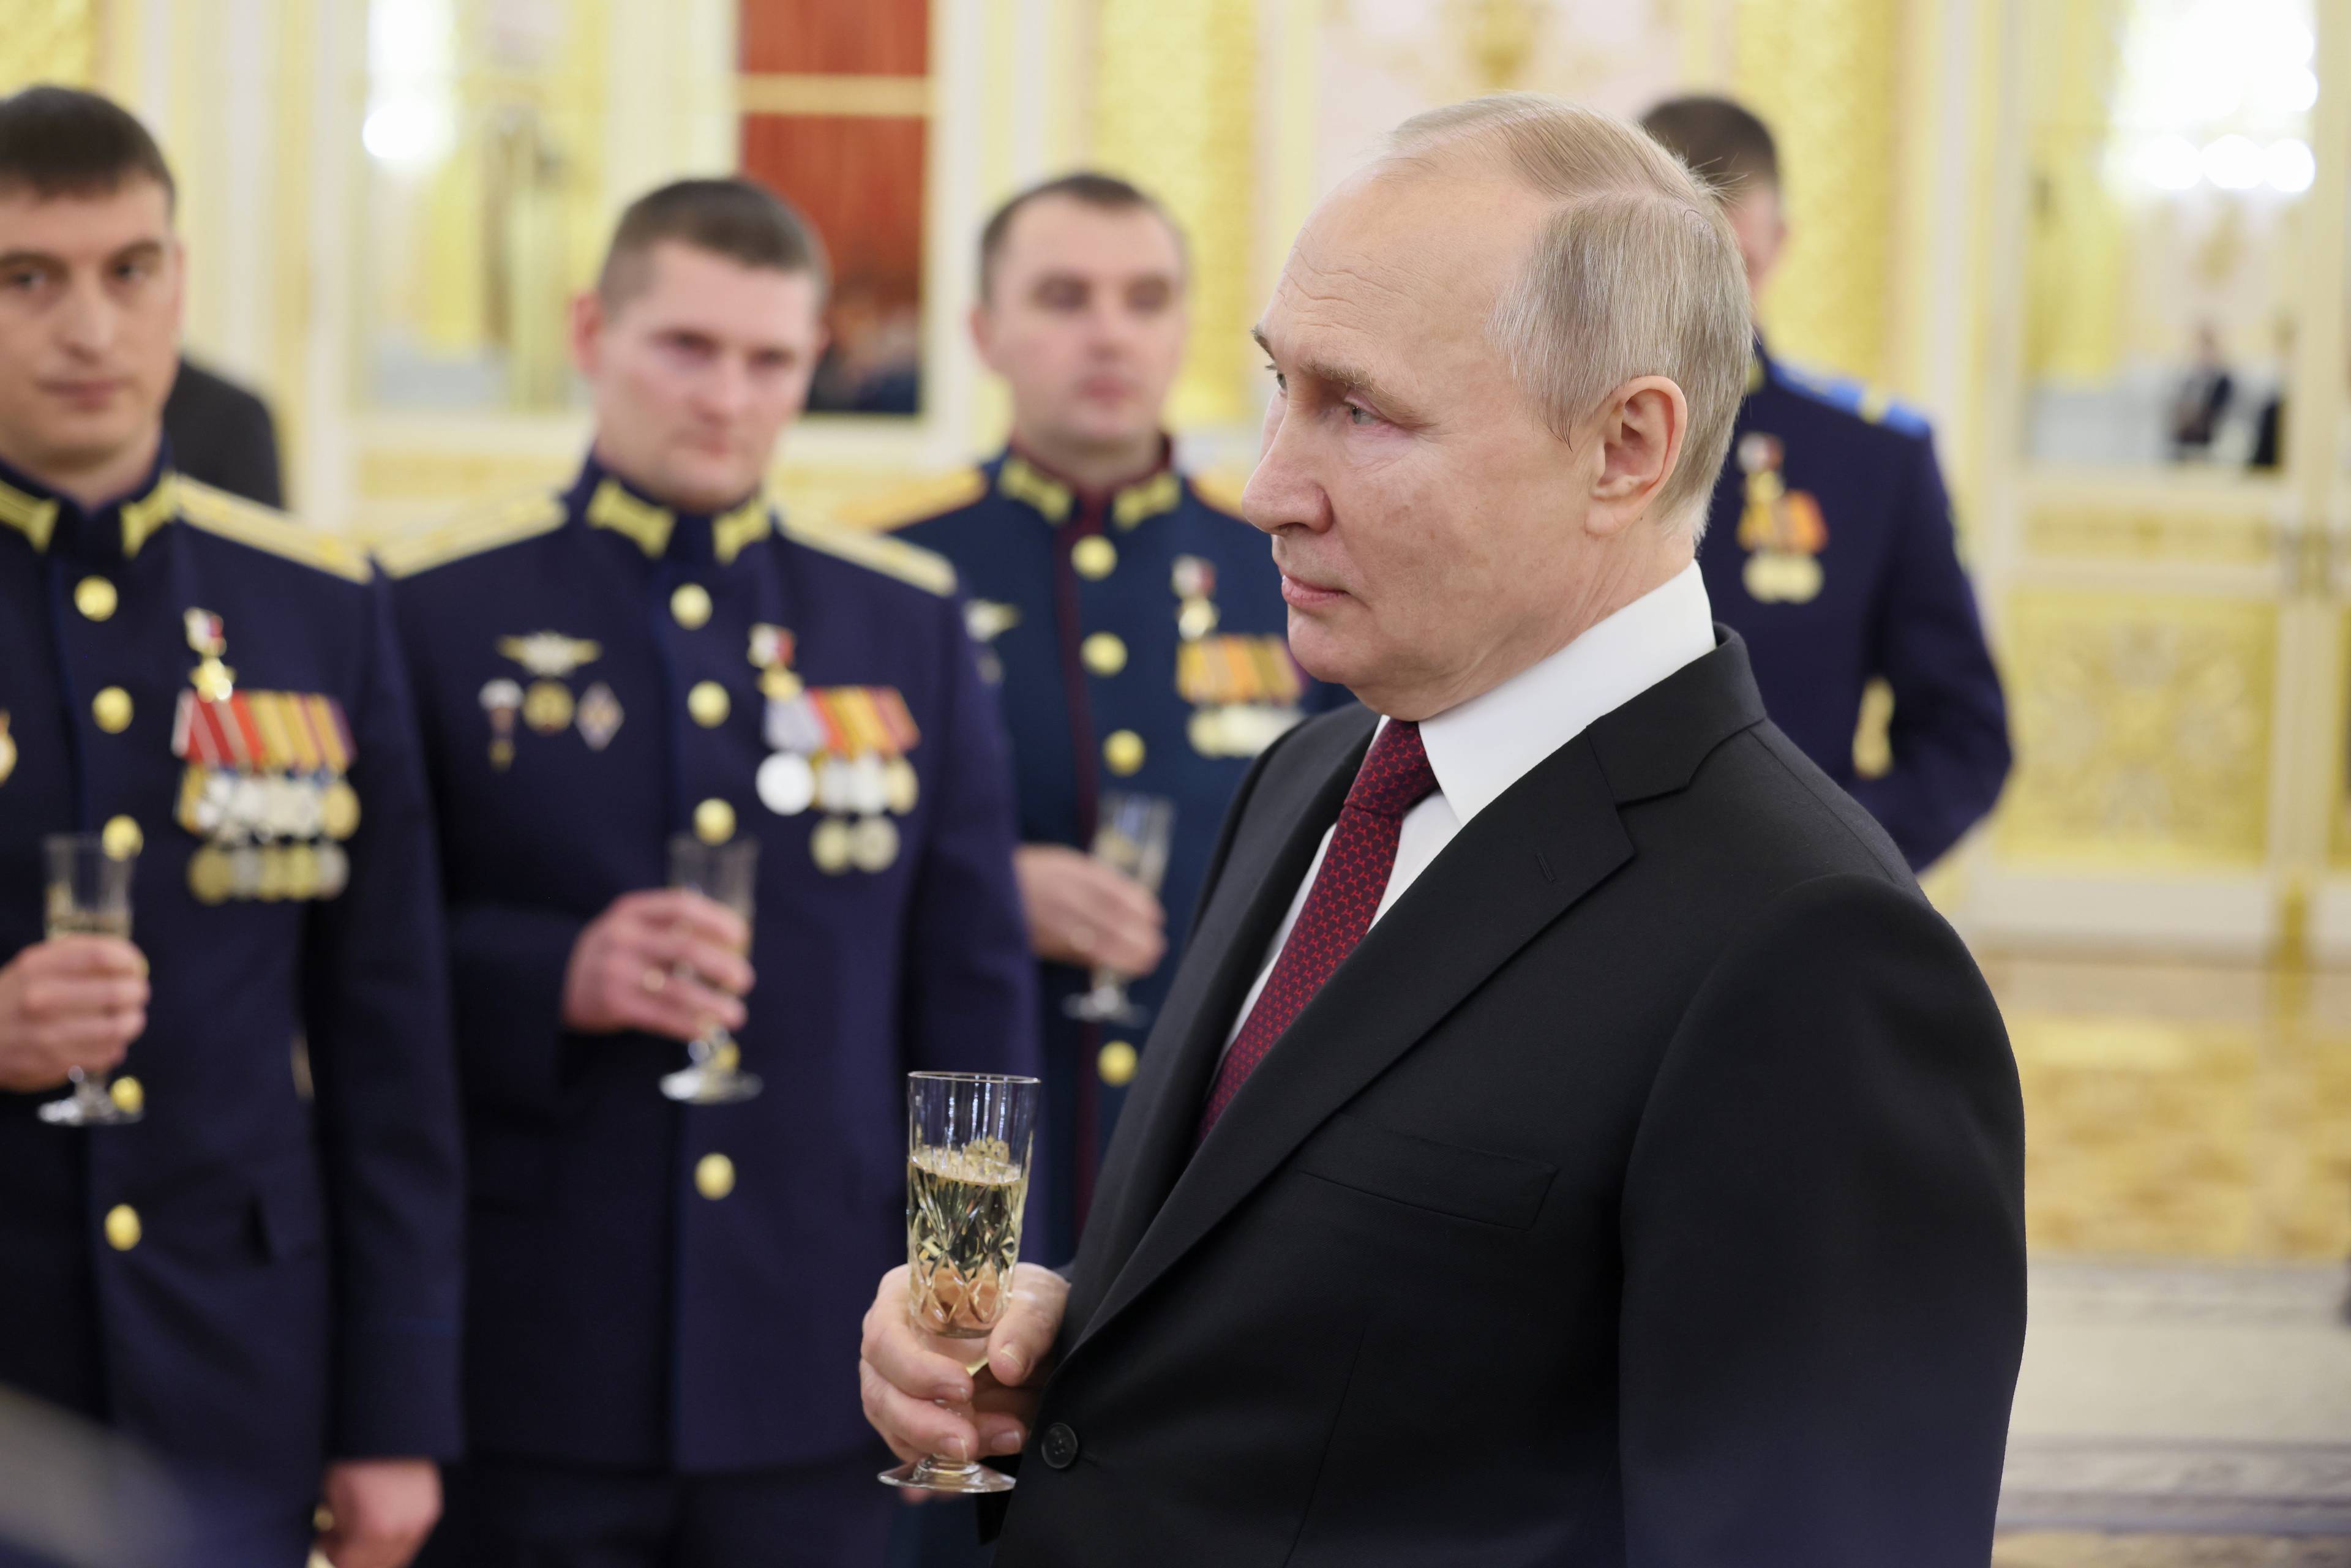 Russian President Vladimir Putin (R) toasts with Russian soldiers after awarding them with the Gold Star medal on the eve of the "Heroes of the Fatherland Day" at the Kremlin in Moscow on December 8, 2022. (Photo by Mikhail Metzel / SPUTNIK / AFP)